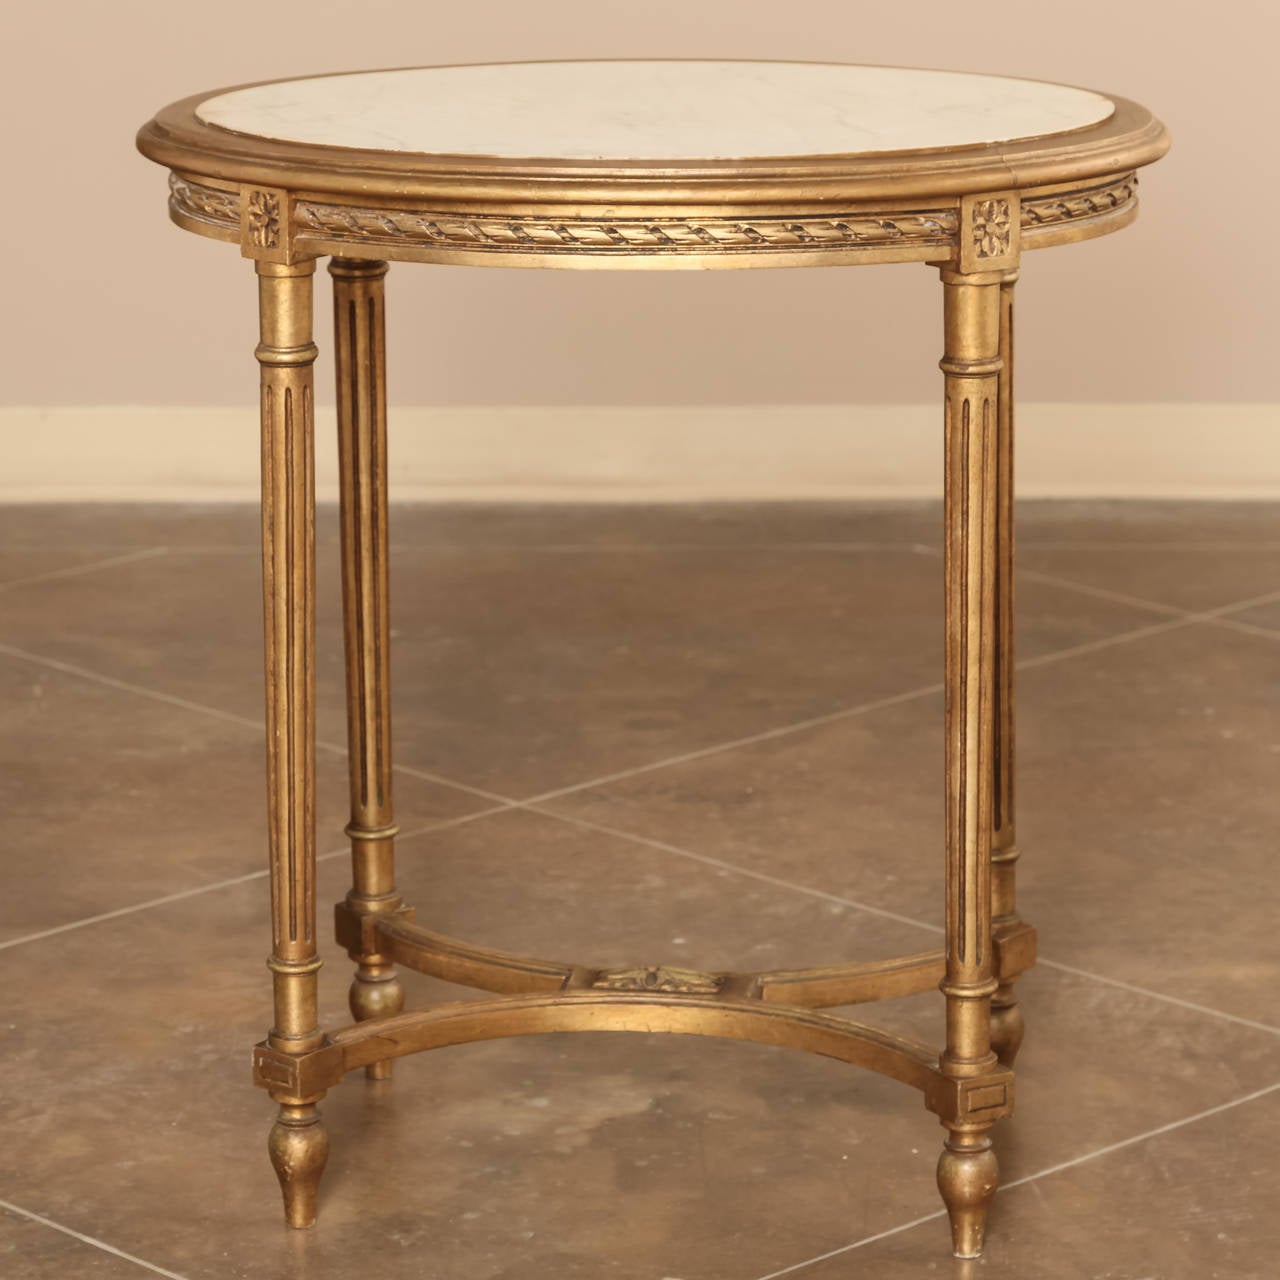 Add elegance to any room with this Classic oval occasional table, handcrafted in the Louis XVI style then given a gold finish and Carrara marble top for the ultimate in carefree opulence. Tapered and fluted legs connected with bowed stretchers